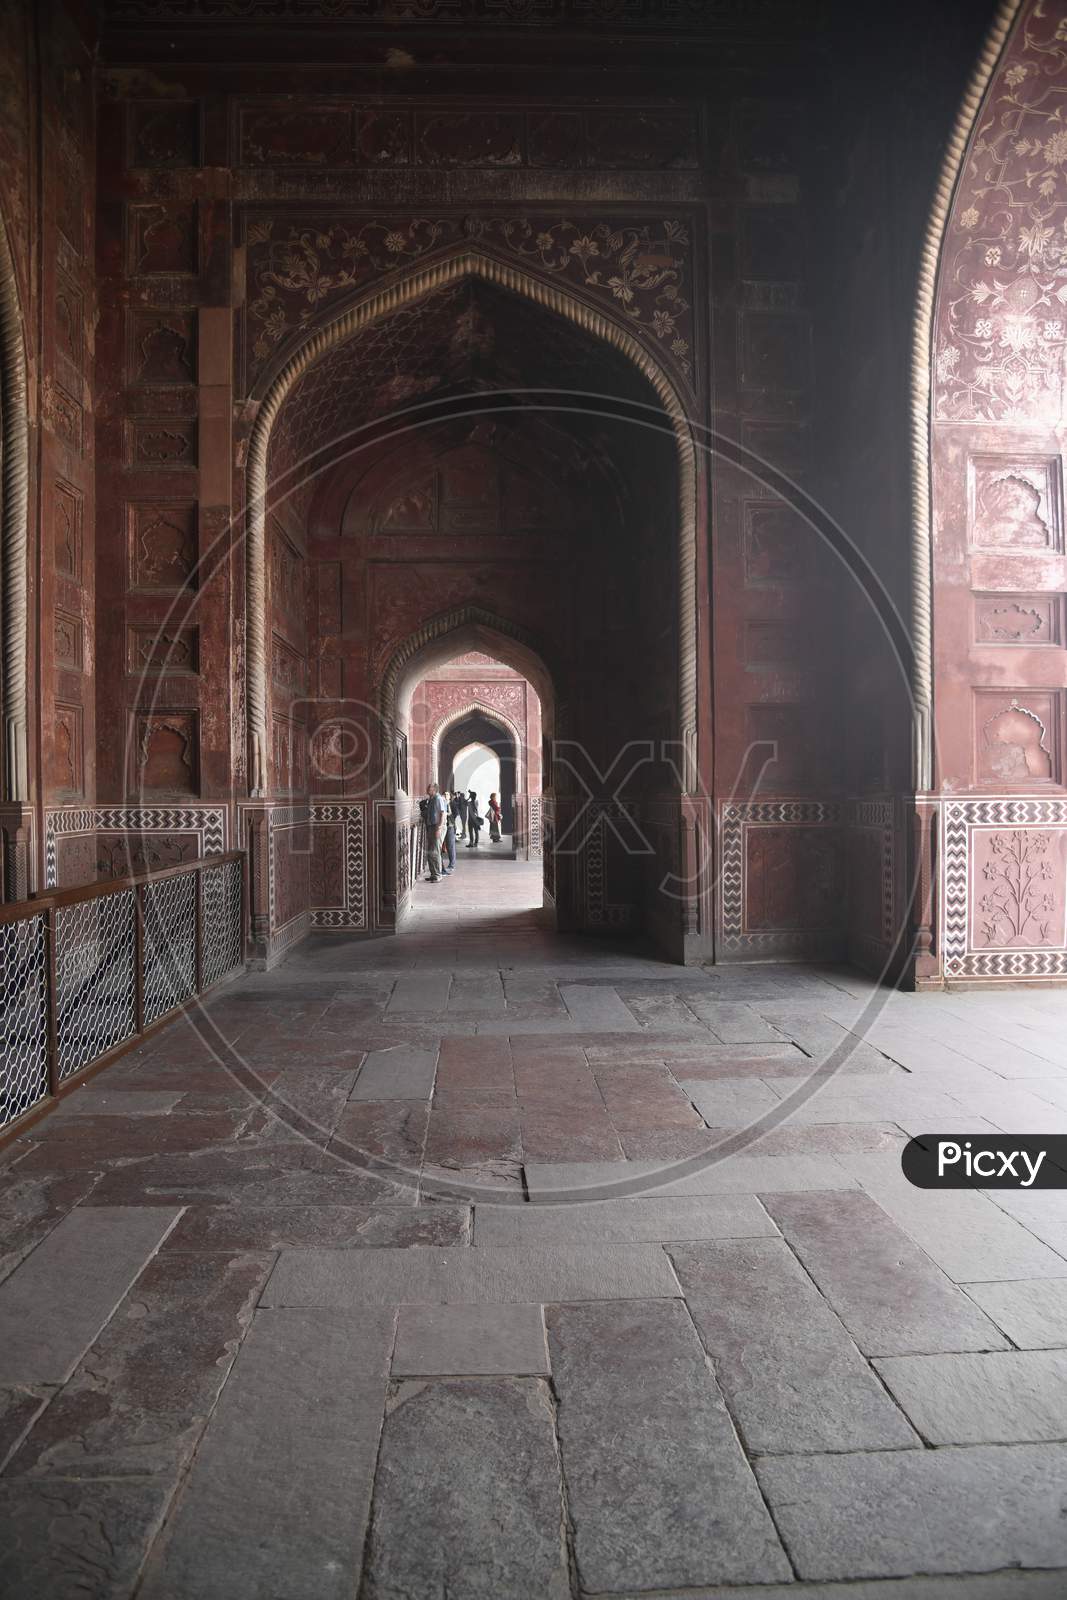 Architecture Of Agra Fort With a Corridor